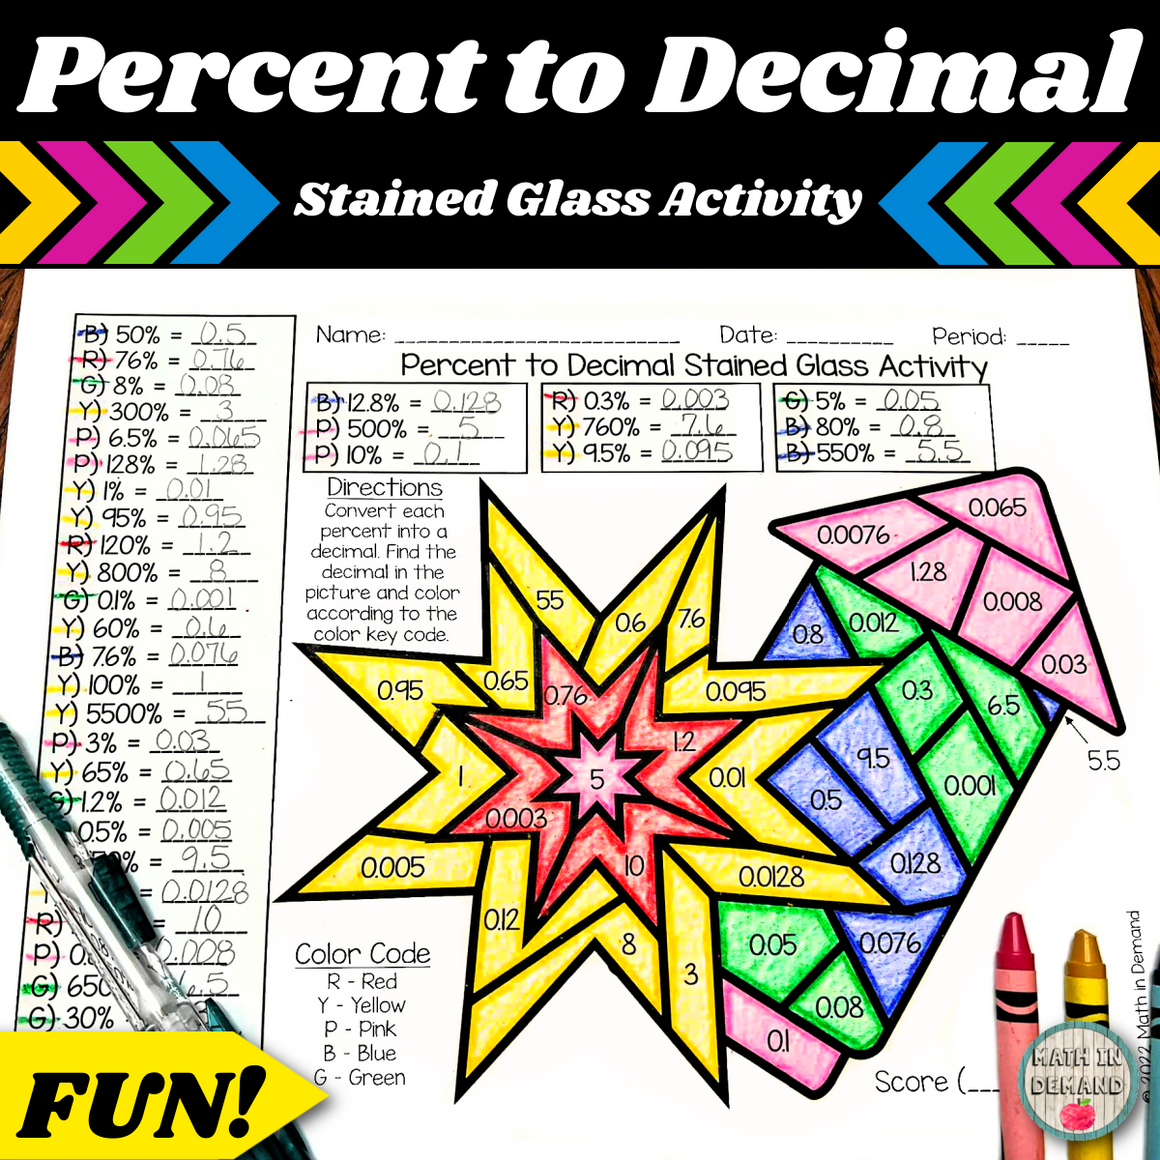 Percent to decimal stained glass activity fall thanksgiving edition